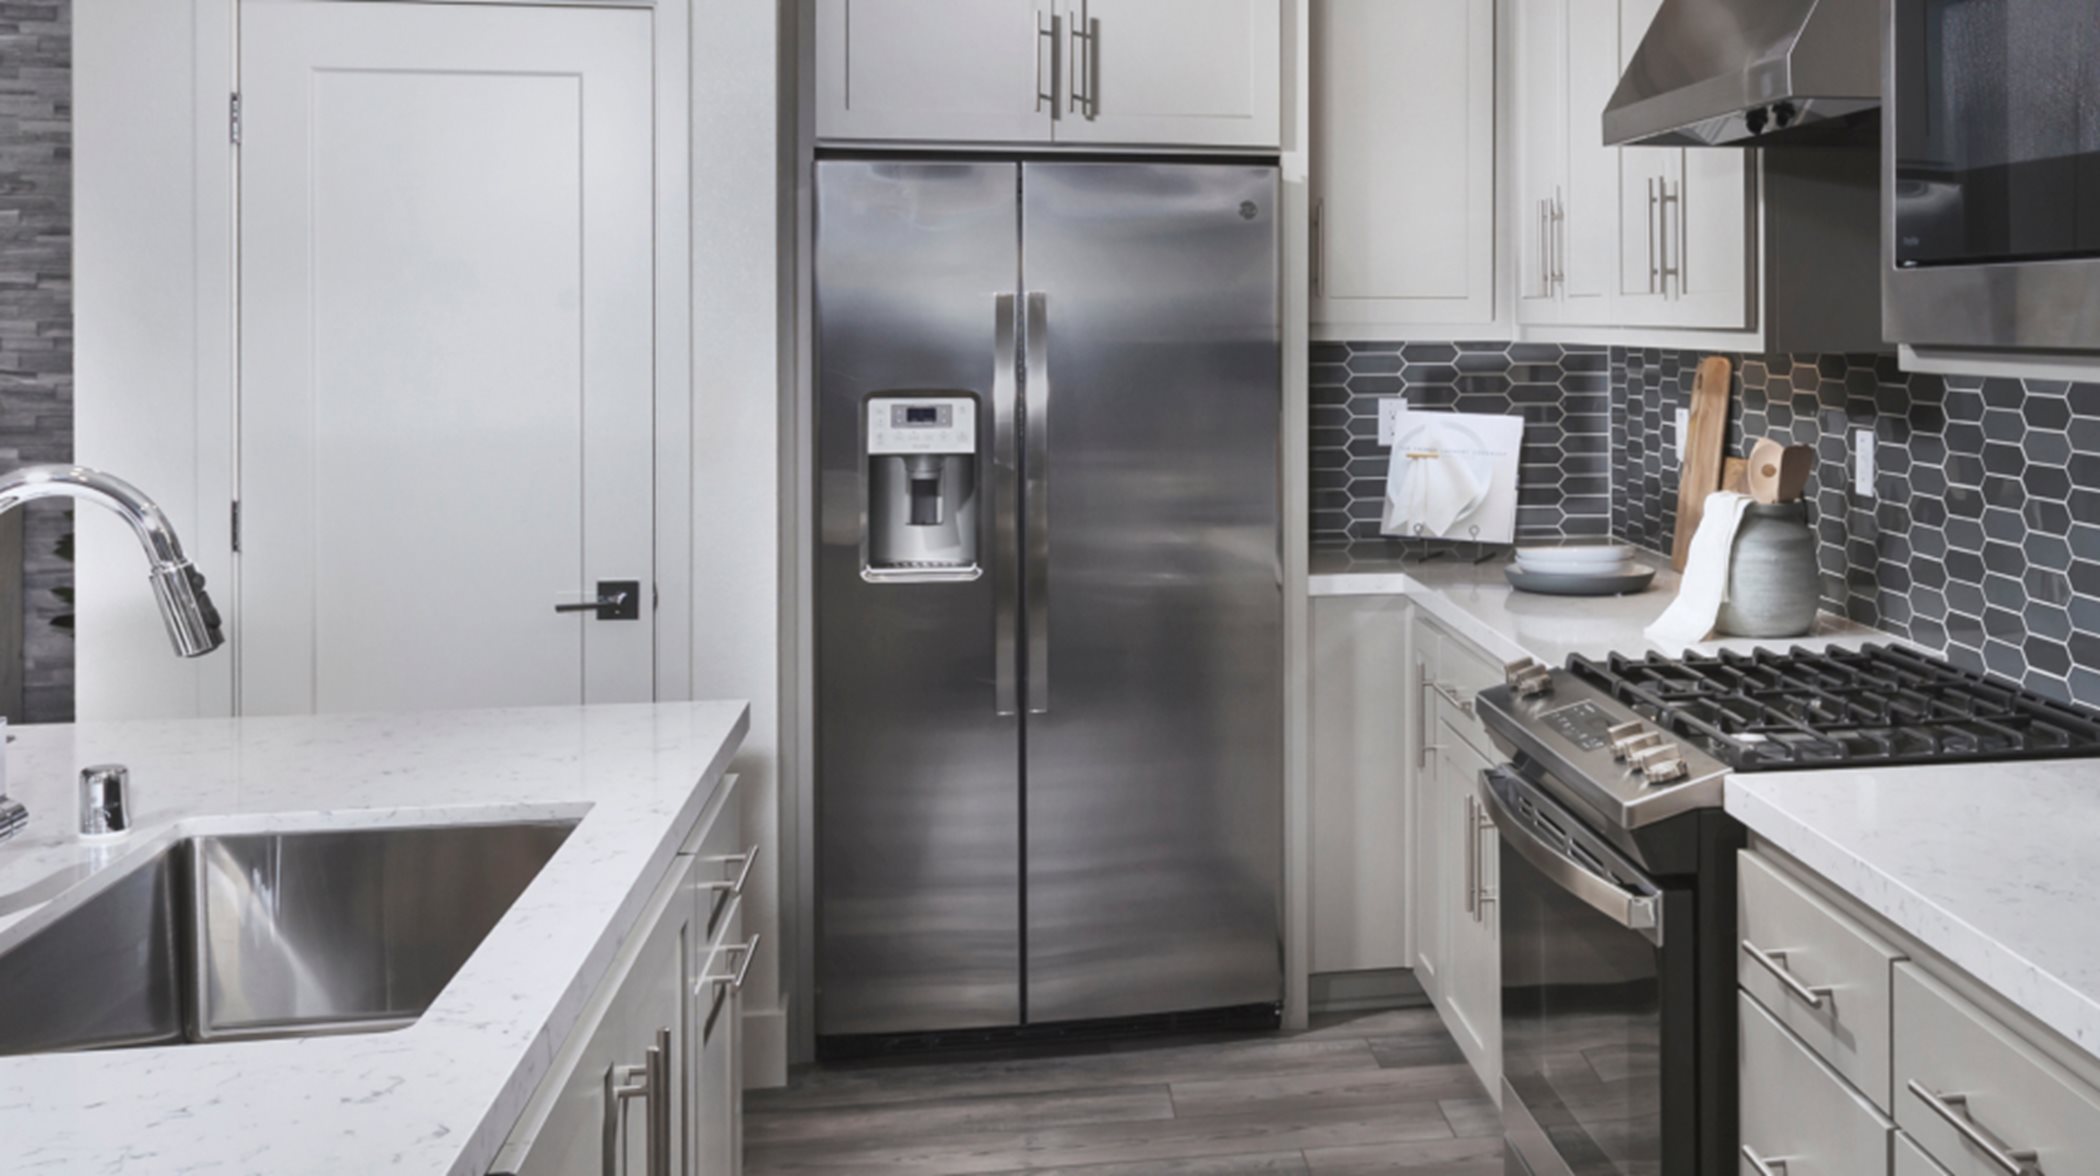 Bungalows stainless steel appliances in kitchen with island